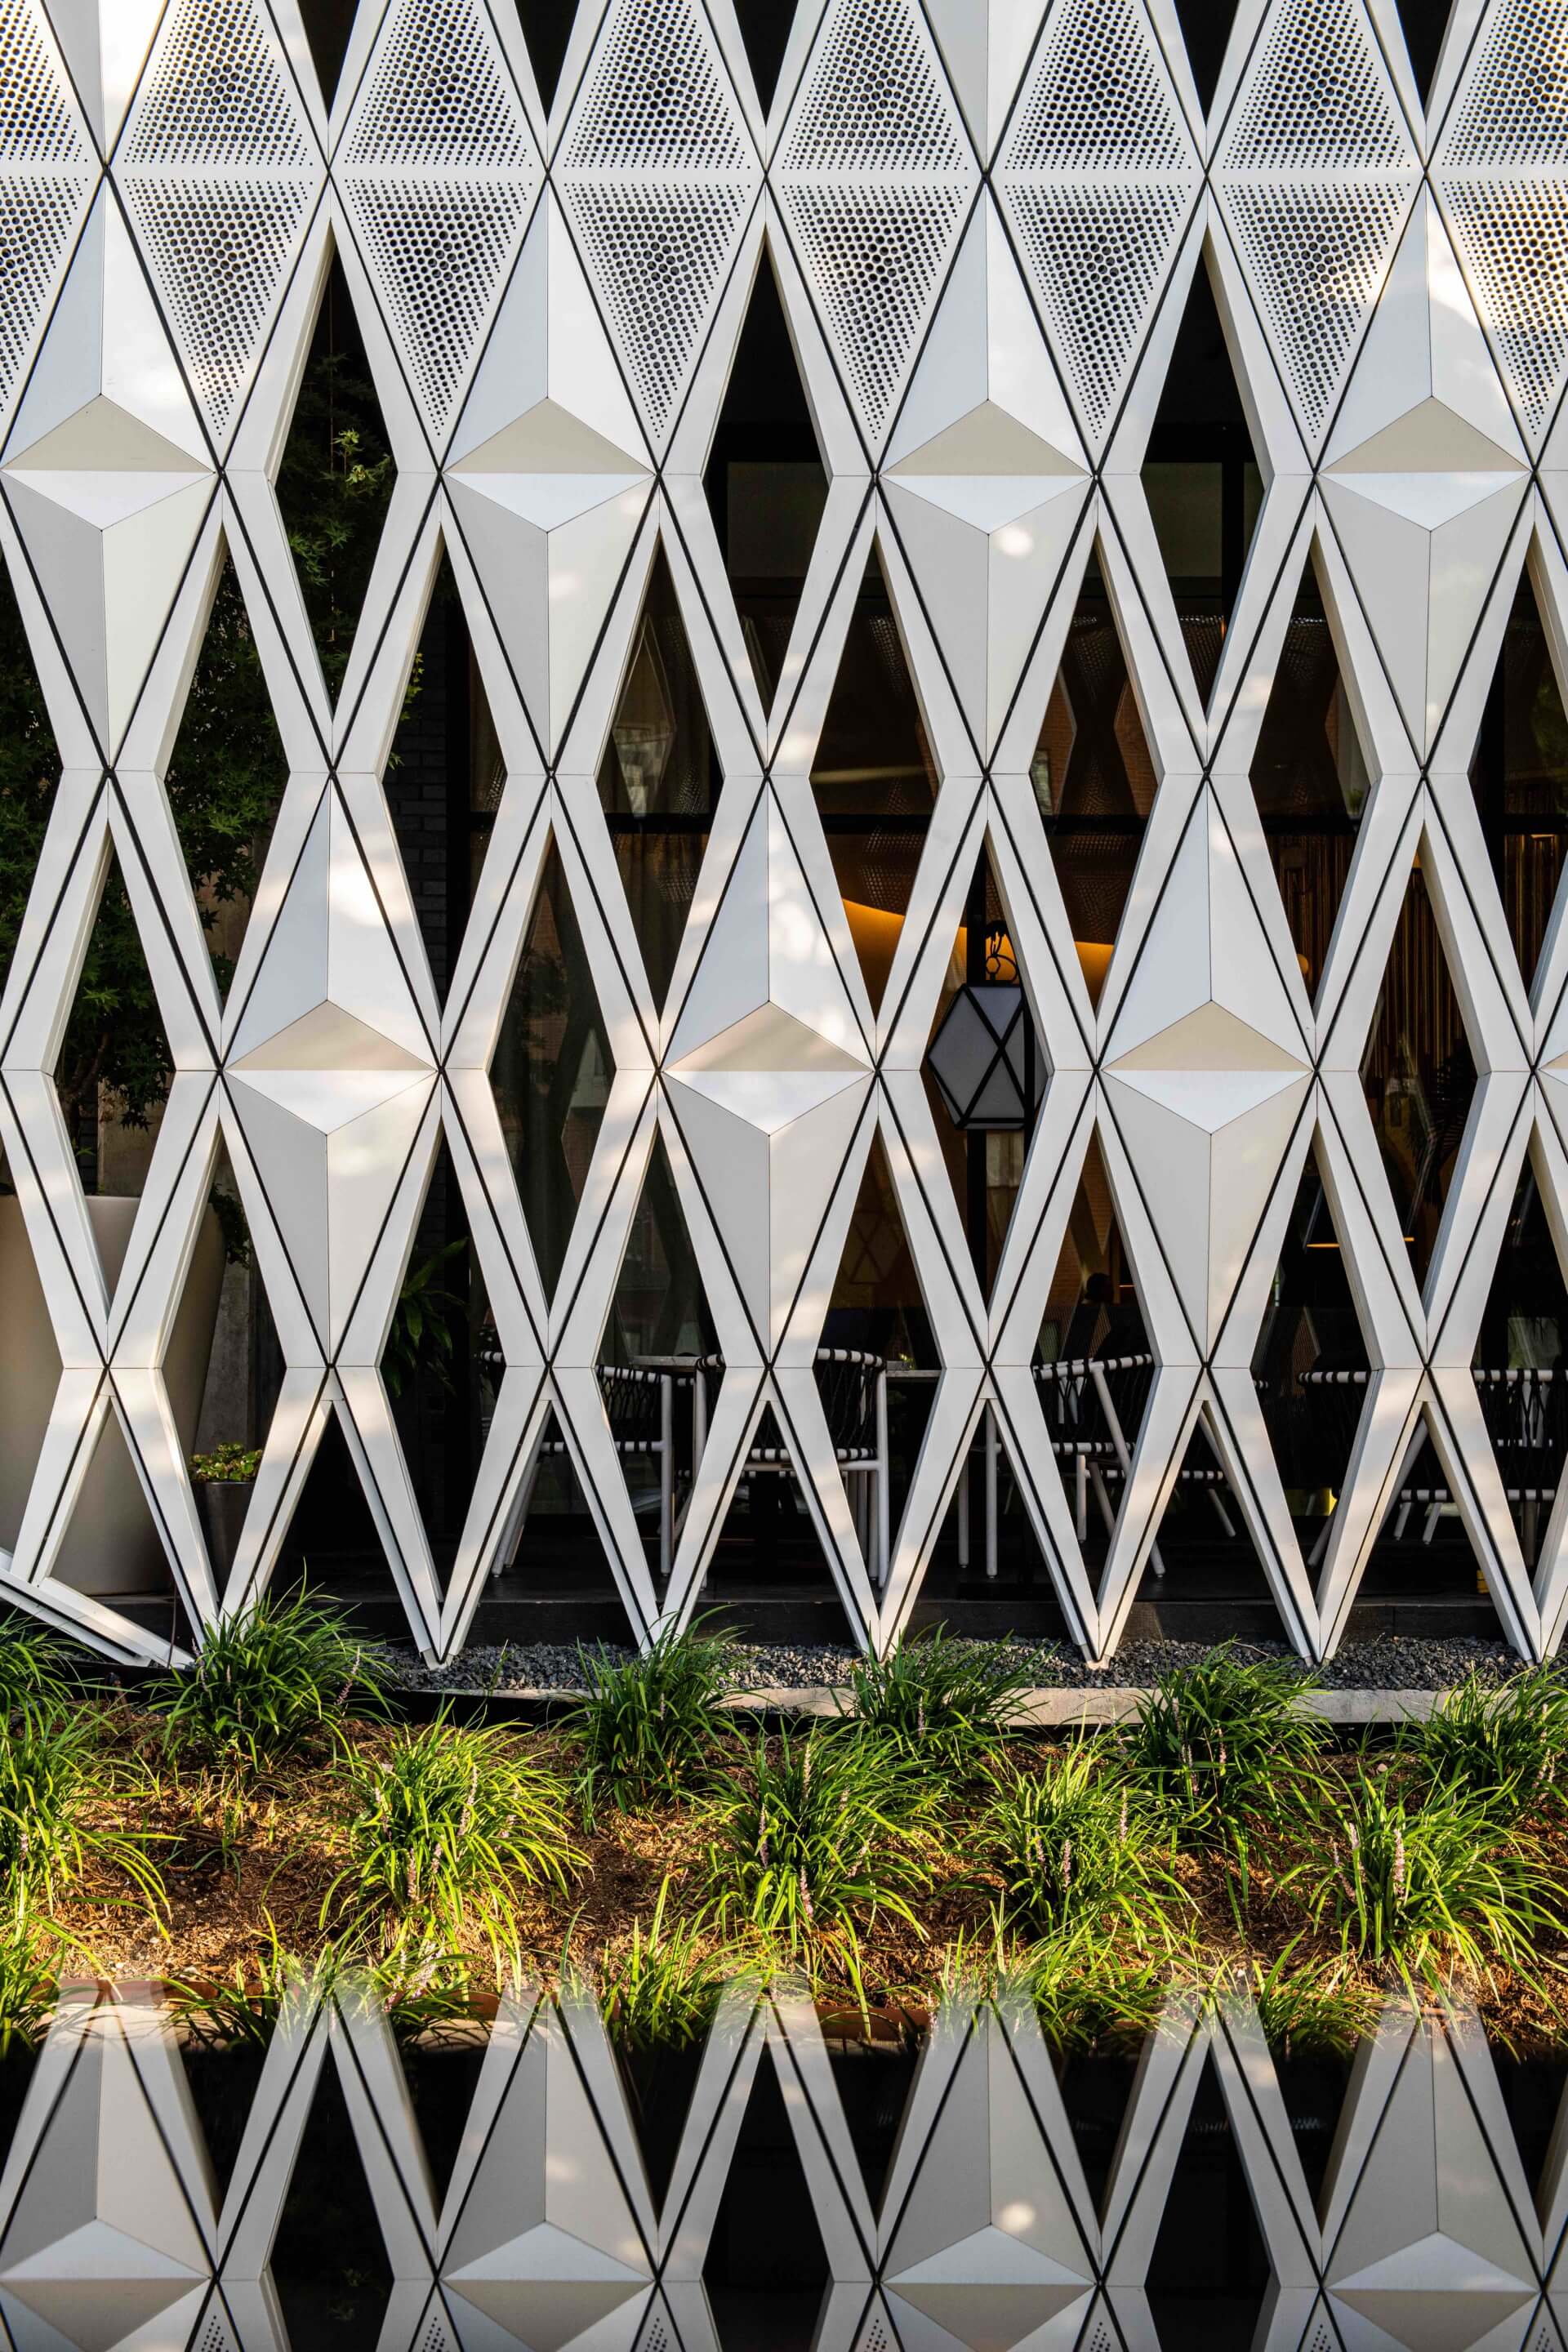 perforated aluminum panels across the virgin hotel with views out of rooms